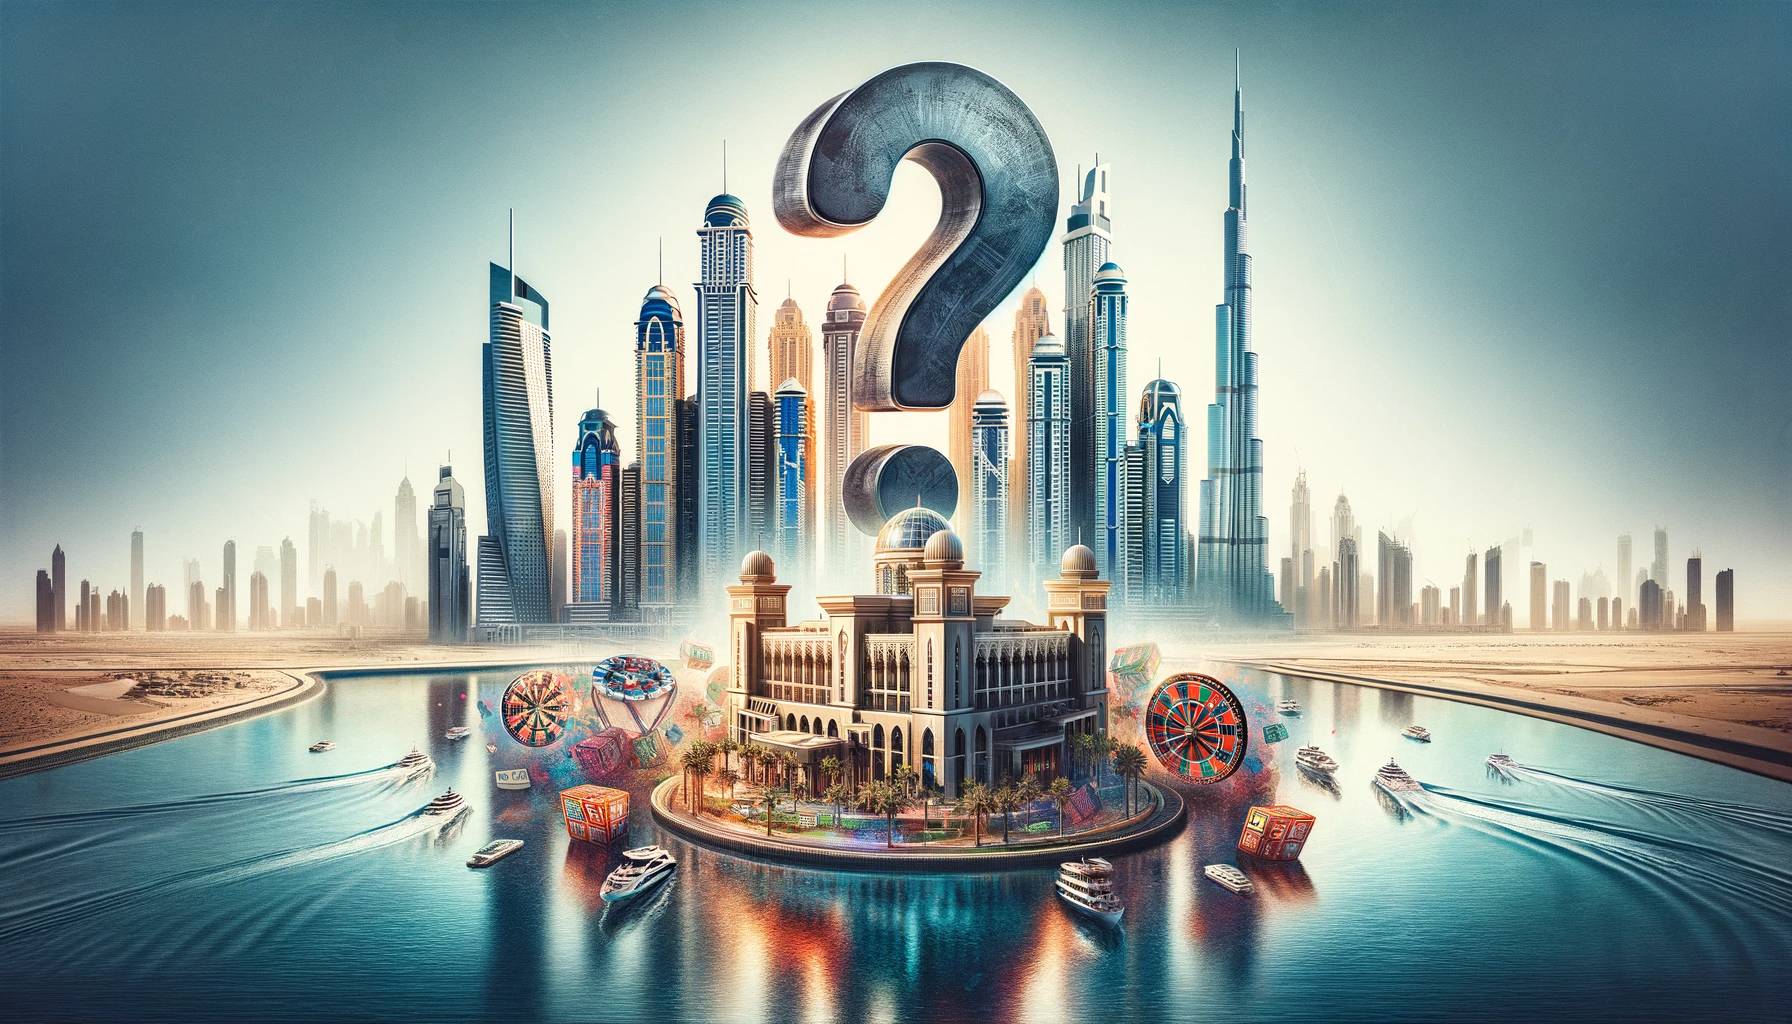 Casinos in Dubai: Are There Options to Gamble?